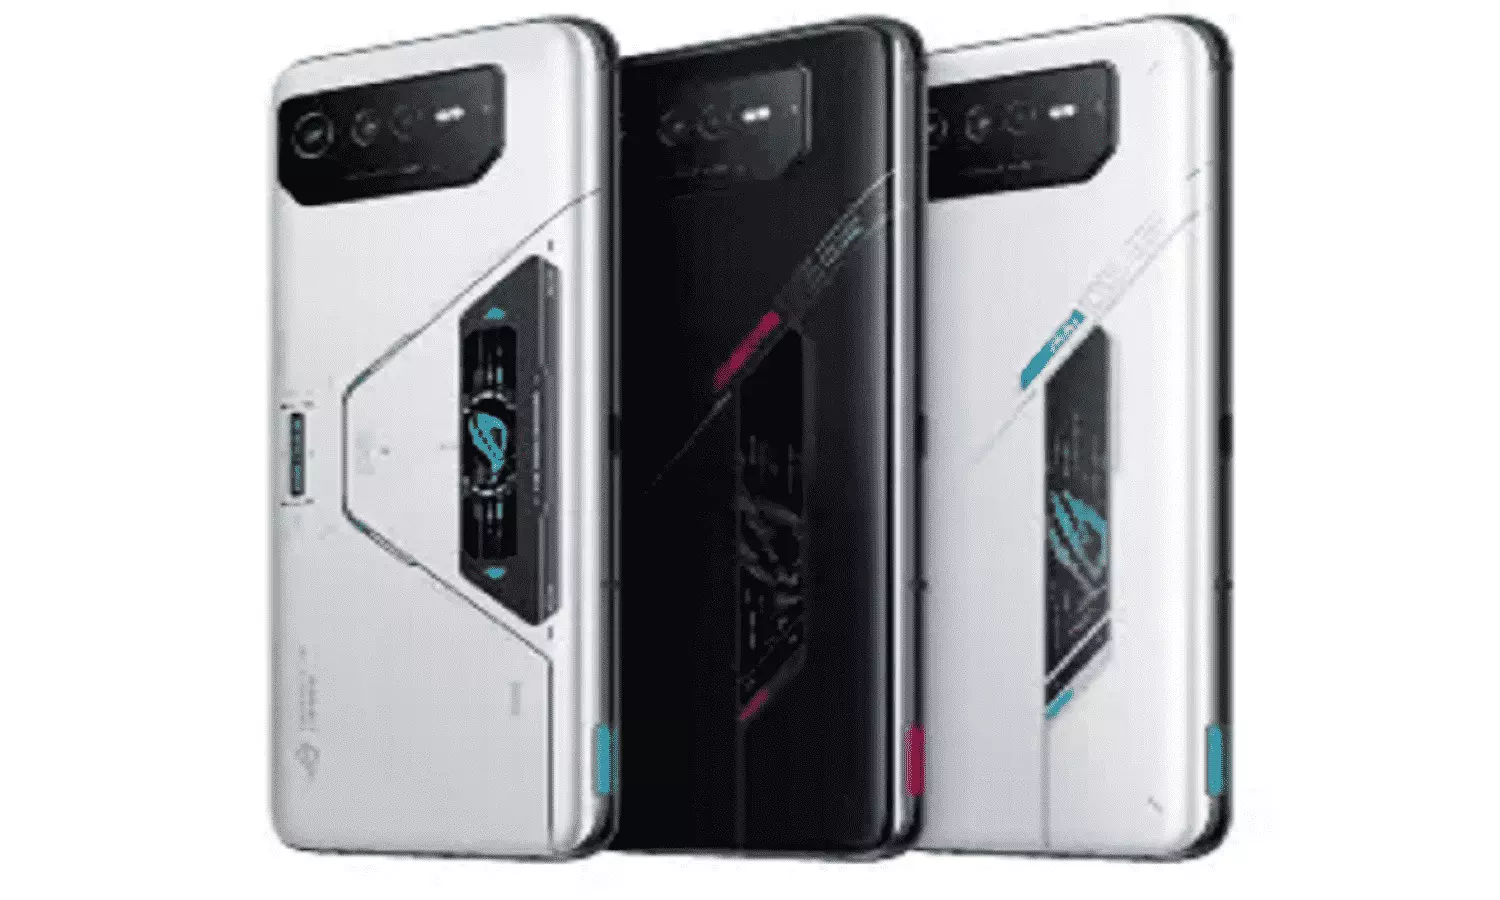 ASUS ROG Phone 7 Specification